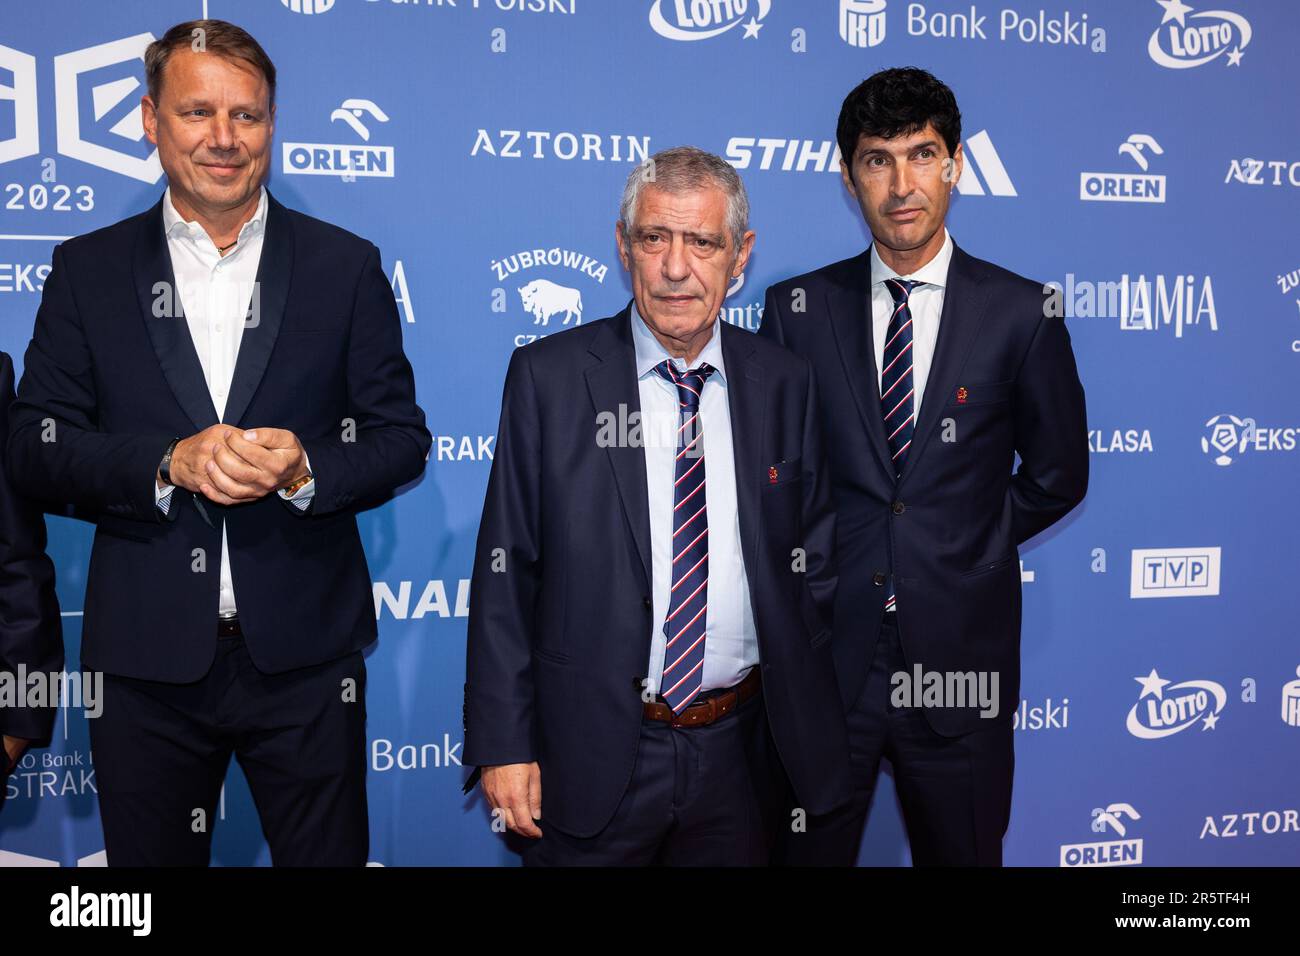 Warsaw, Poland. 29th May, 2023. Grzegorz Mielcarski (L), Fernando Santos (C), Joao Costa (R) are seen during the Gala of Ekstraklasa 2023 in Warsaw. Credit: SOPA Images Limited/Alamy Live News Stock Photo